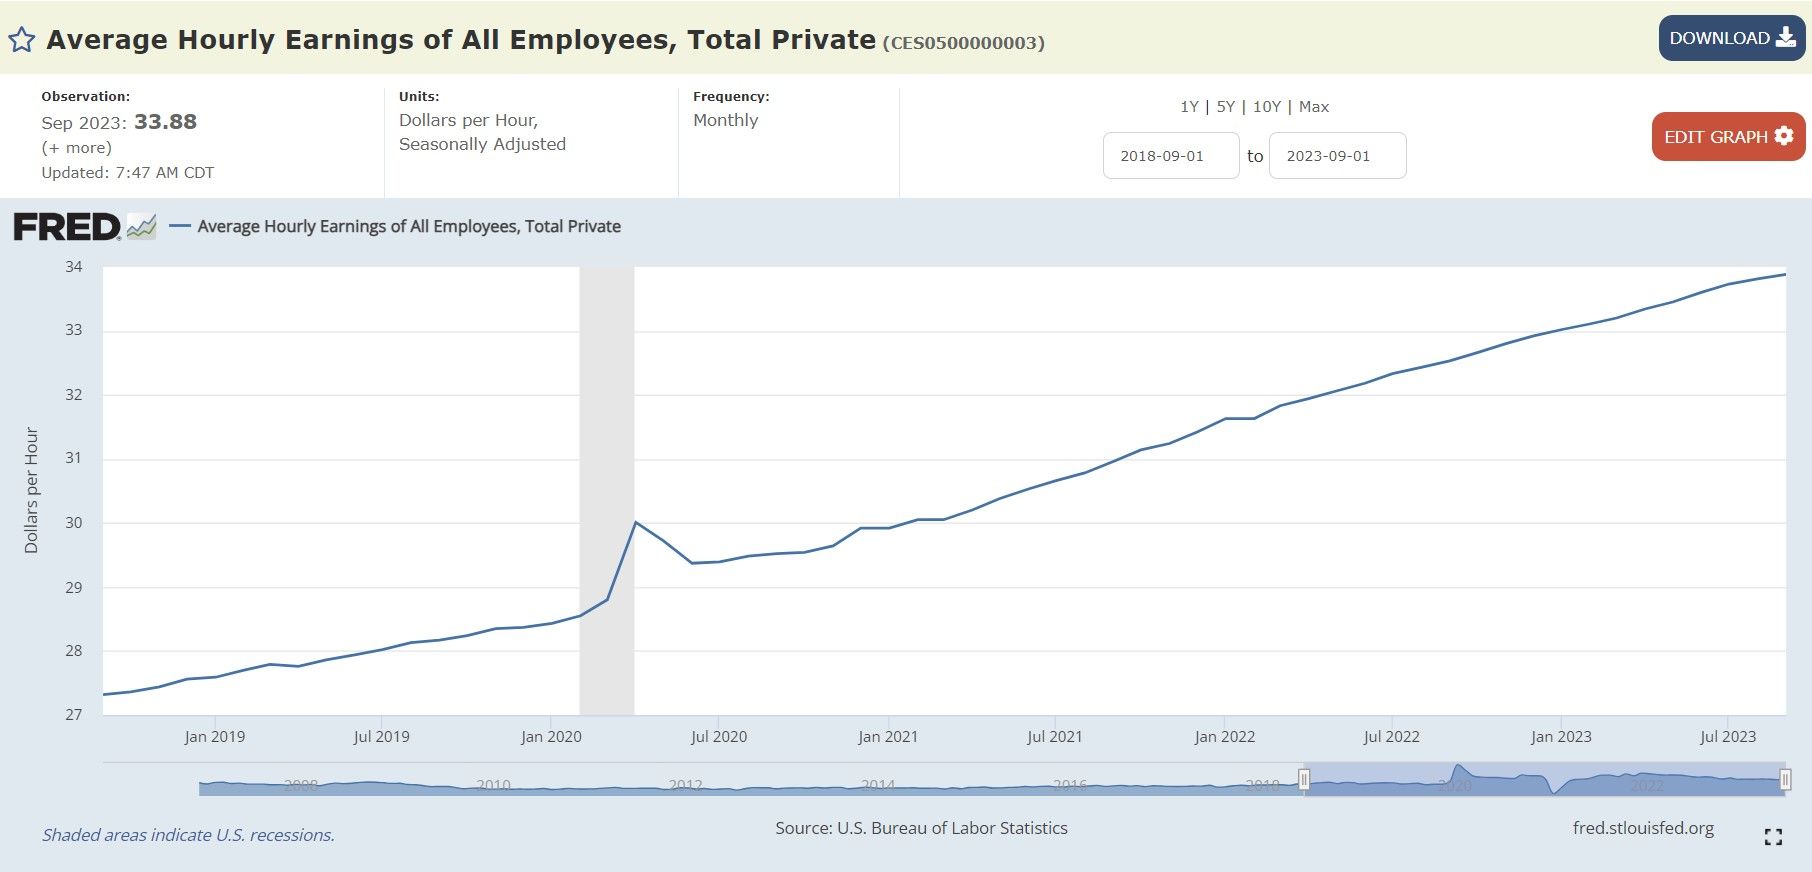 Average Hourly Earnings of All Employees